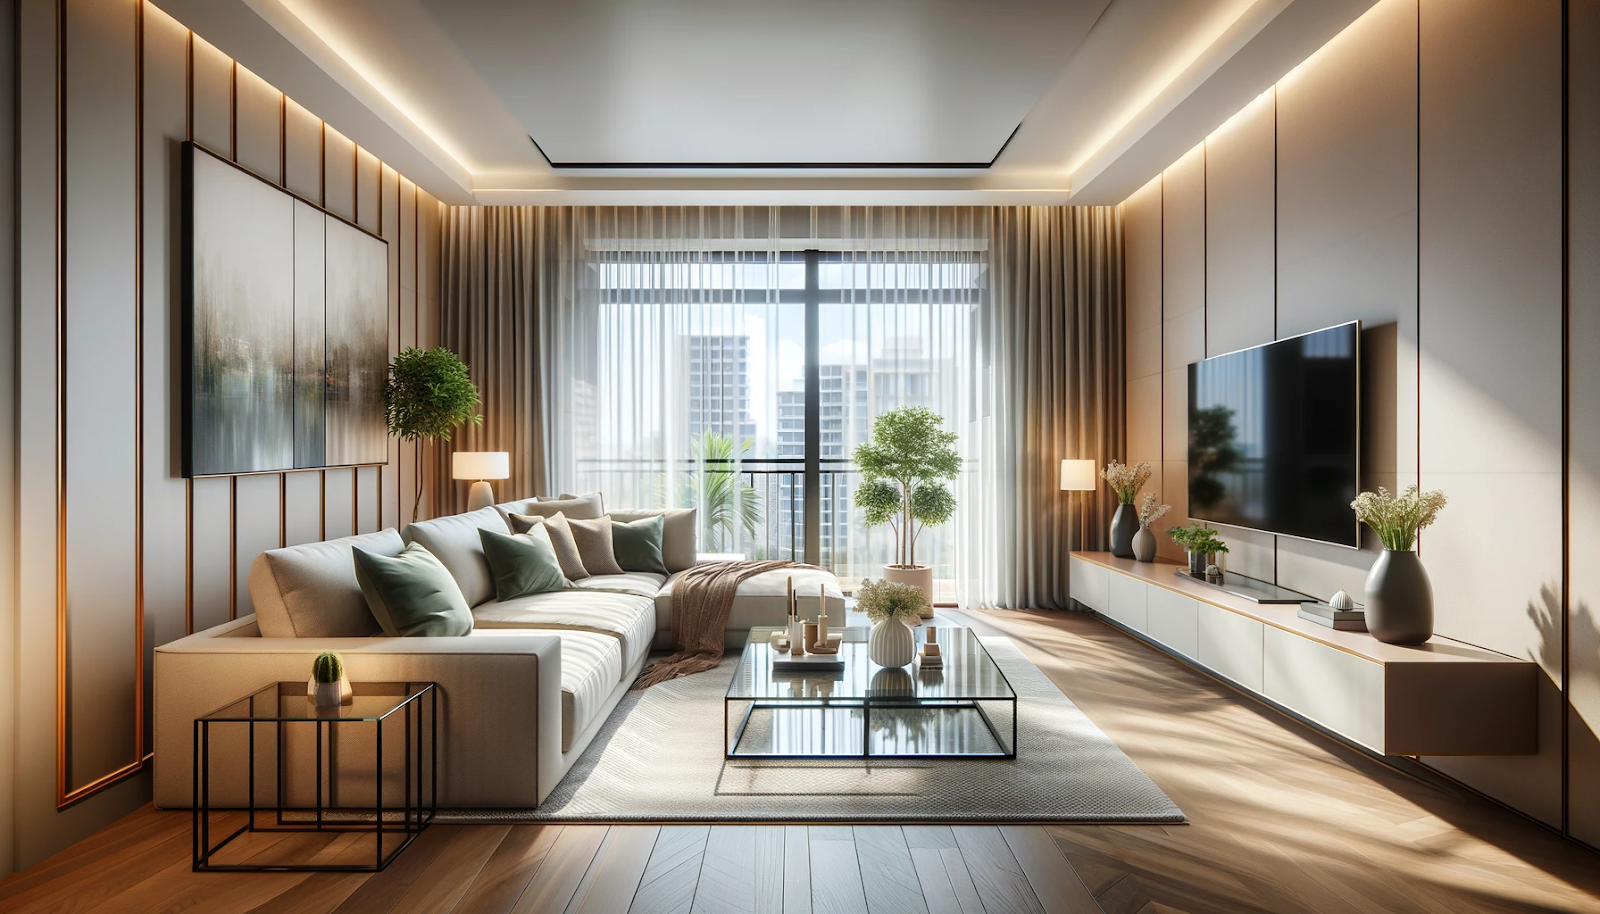 DALL·E-2023-12-18-16.26.45-A-modern-and-spacious-living-room-in-an-apartment-viewed-from-a-wide-angle.-The-room-features-large-windows-with-sheer-curtains-allowing-natural-lig.png